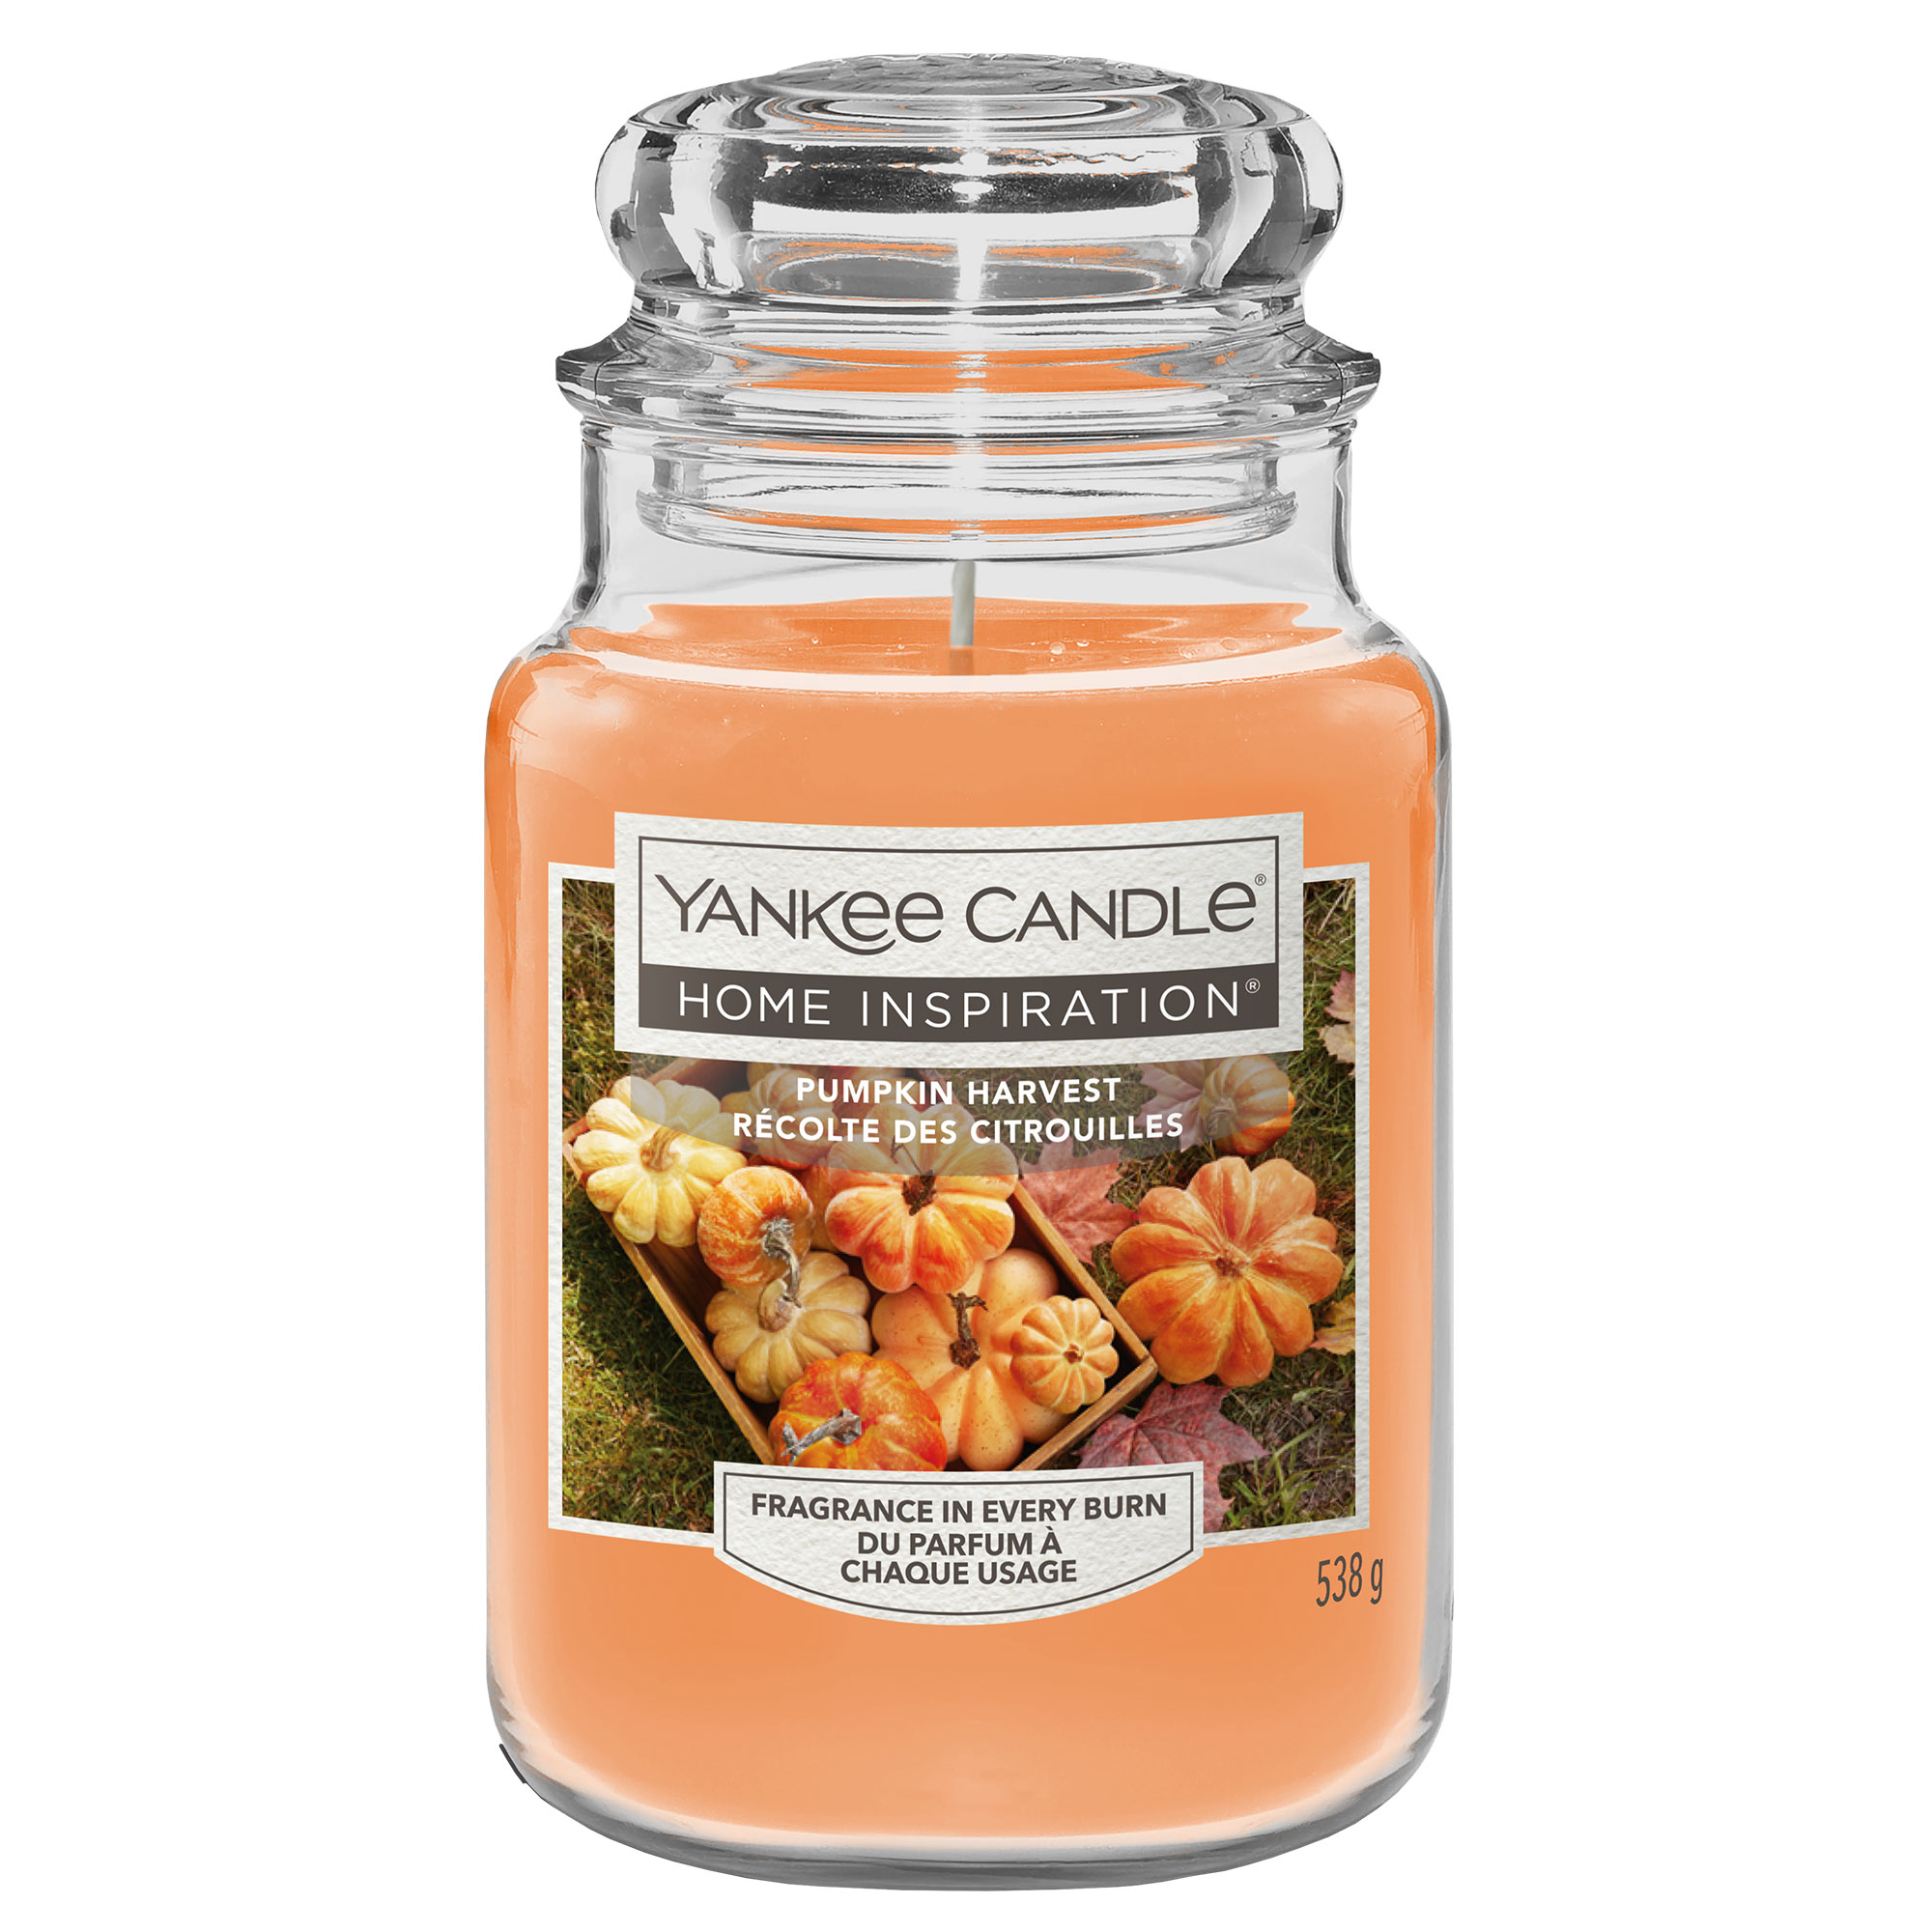 Yankee Candle Home Inspiration Pumpkin Harvest Large Candle 